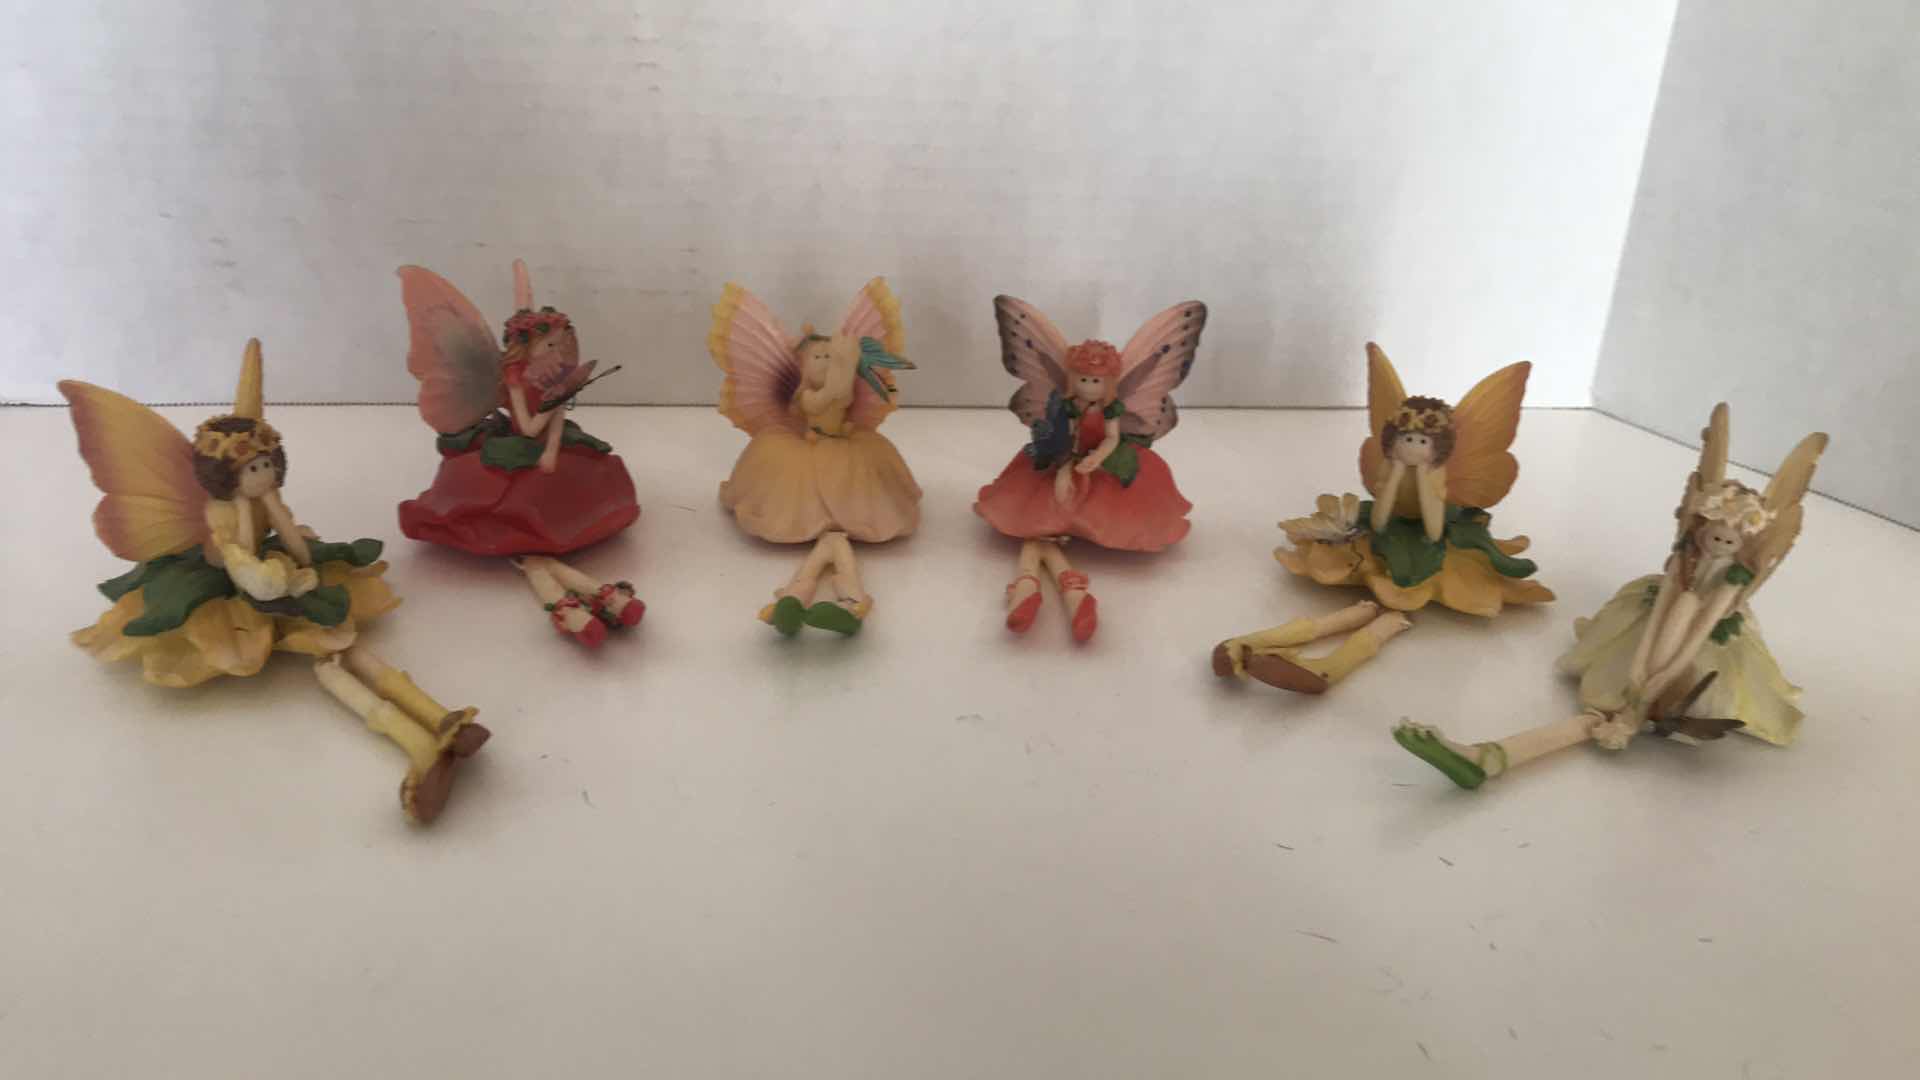 Photo 1 of COLLECTION OF SIX CERAMIC FAIRIES WITH DANGLING LEGS, APPROX 4” SITTING